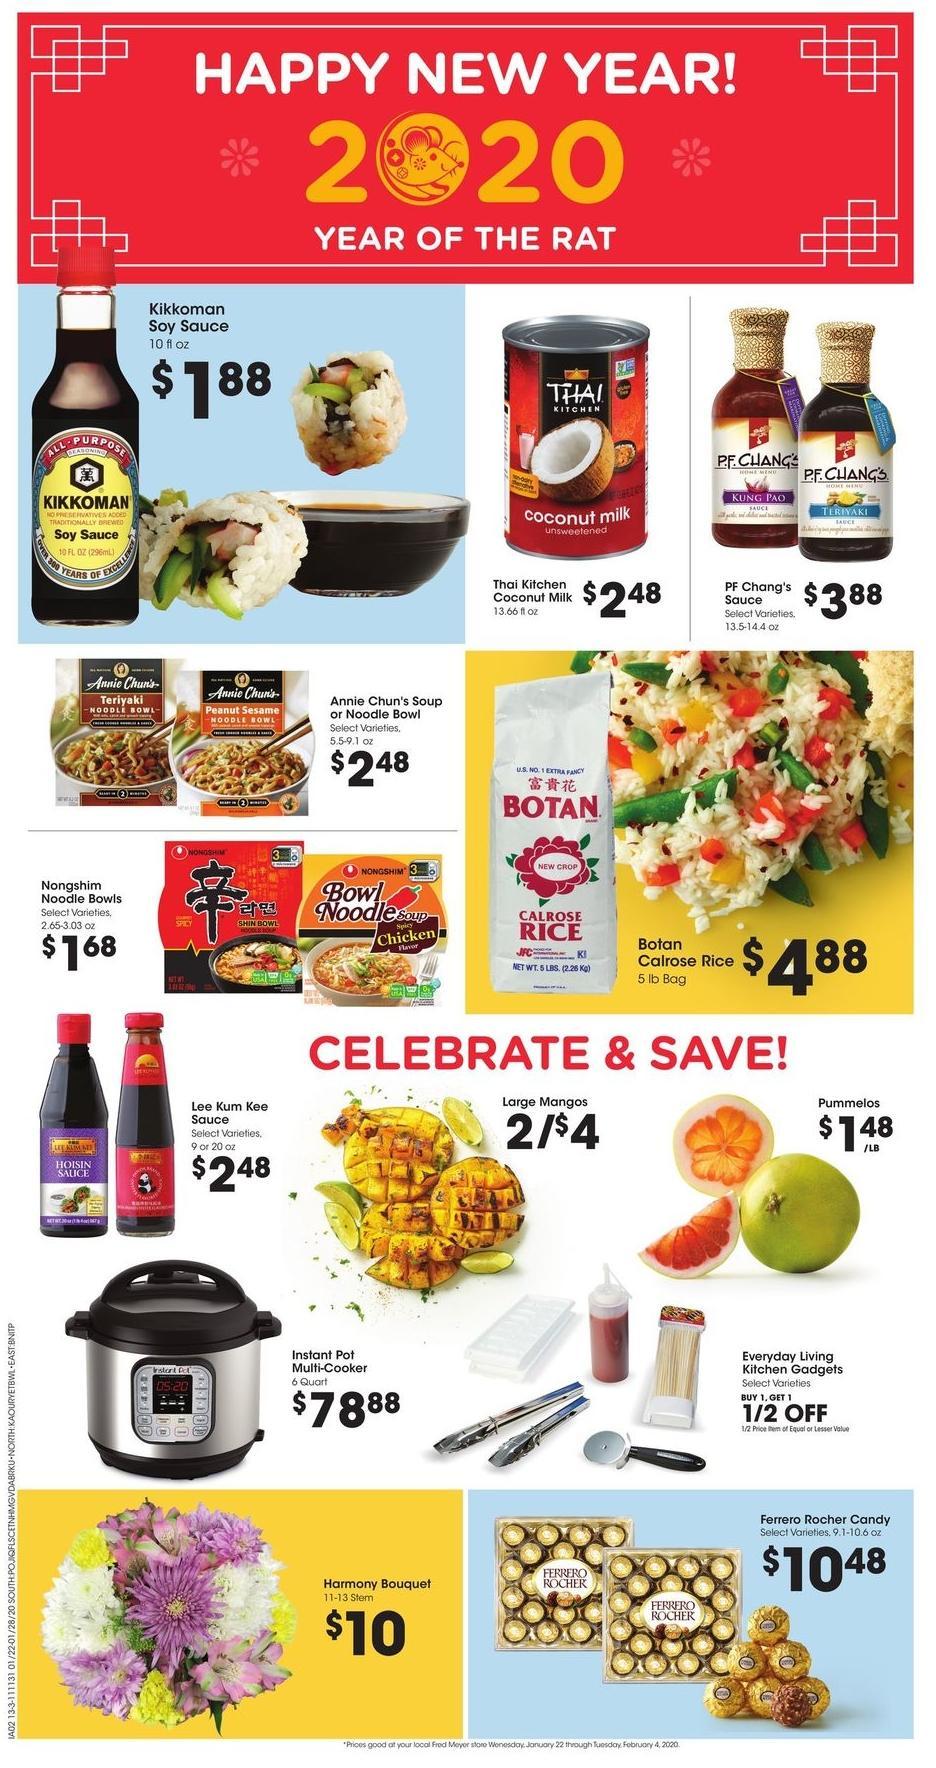 Fred Meyer Weekly Ad from January 22